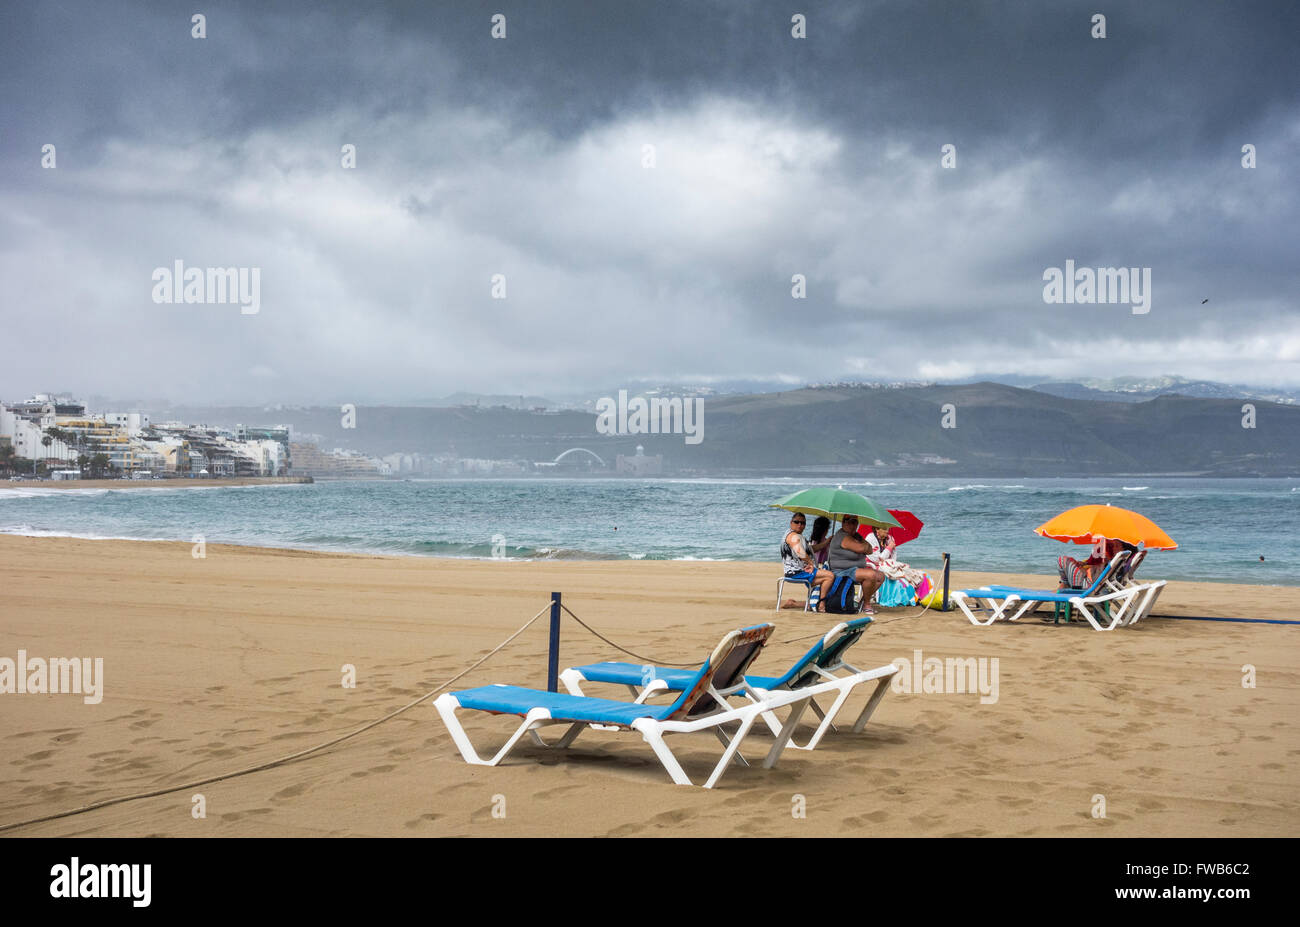 Las Palmas, Gran Canaria, Canary Islands, Spain, 3rd April 2016. Weather: With much of the UK forecast to have warm sunshine on Sunday and UK press saying 'hotter than Spain...', it`s a wet Sunday morning in Las Palmas on Gran Canaria as a band of rain sweeps over the city beach. PICTURED: A group of locals sit under parasols on Las Canteras beach waiting for Sunday morning rain to ease as black clouds pass overhead. Credit:  Alan Dawson News/Alamy Live News Stock Photo